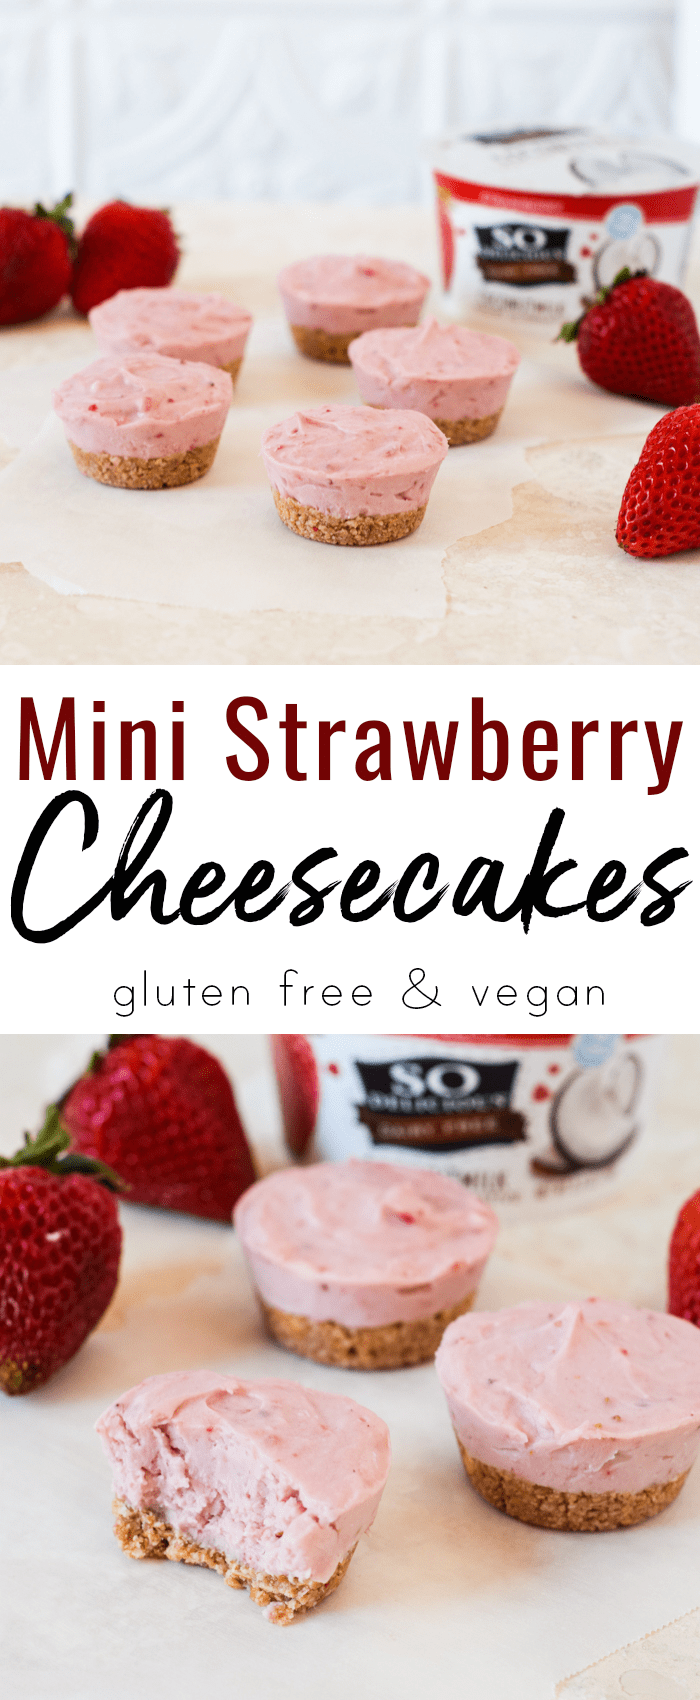 image collage of gluten free vegan mini strawberry cheesecakes on parchment paper